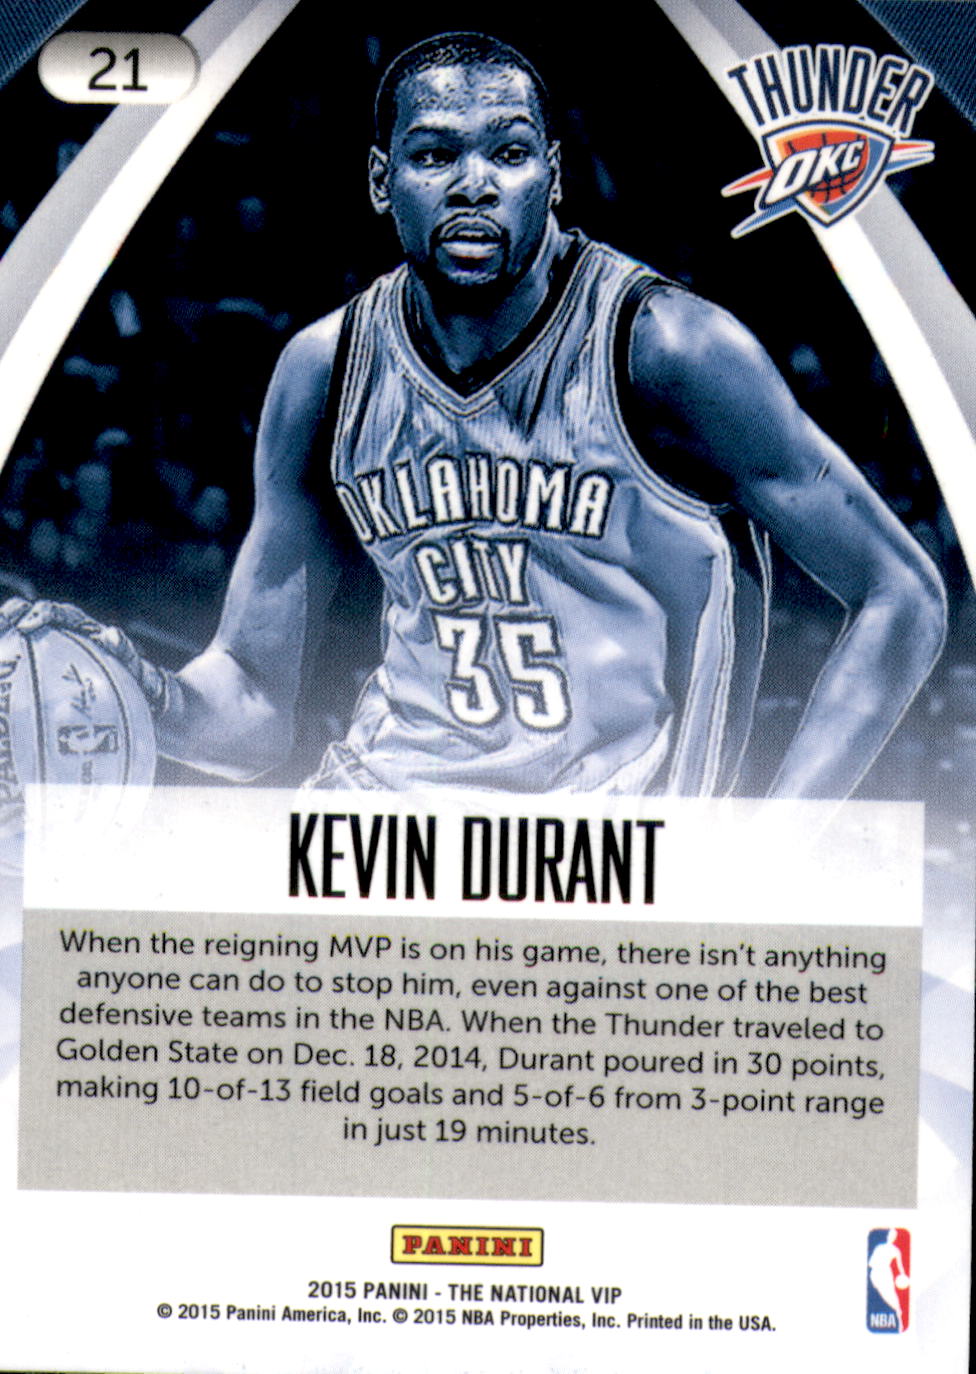 2015 Panini National Convention VIP Party #21 Kevin Durant BK back image